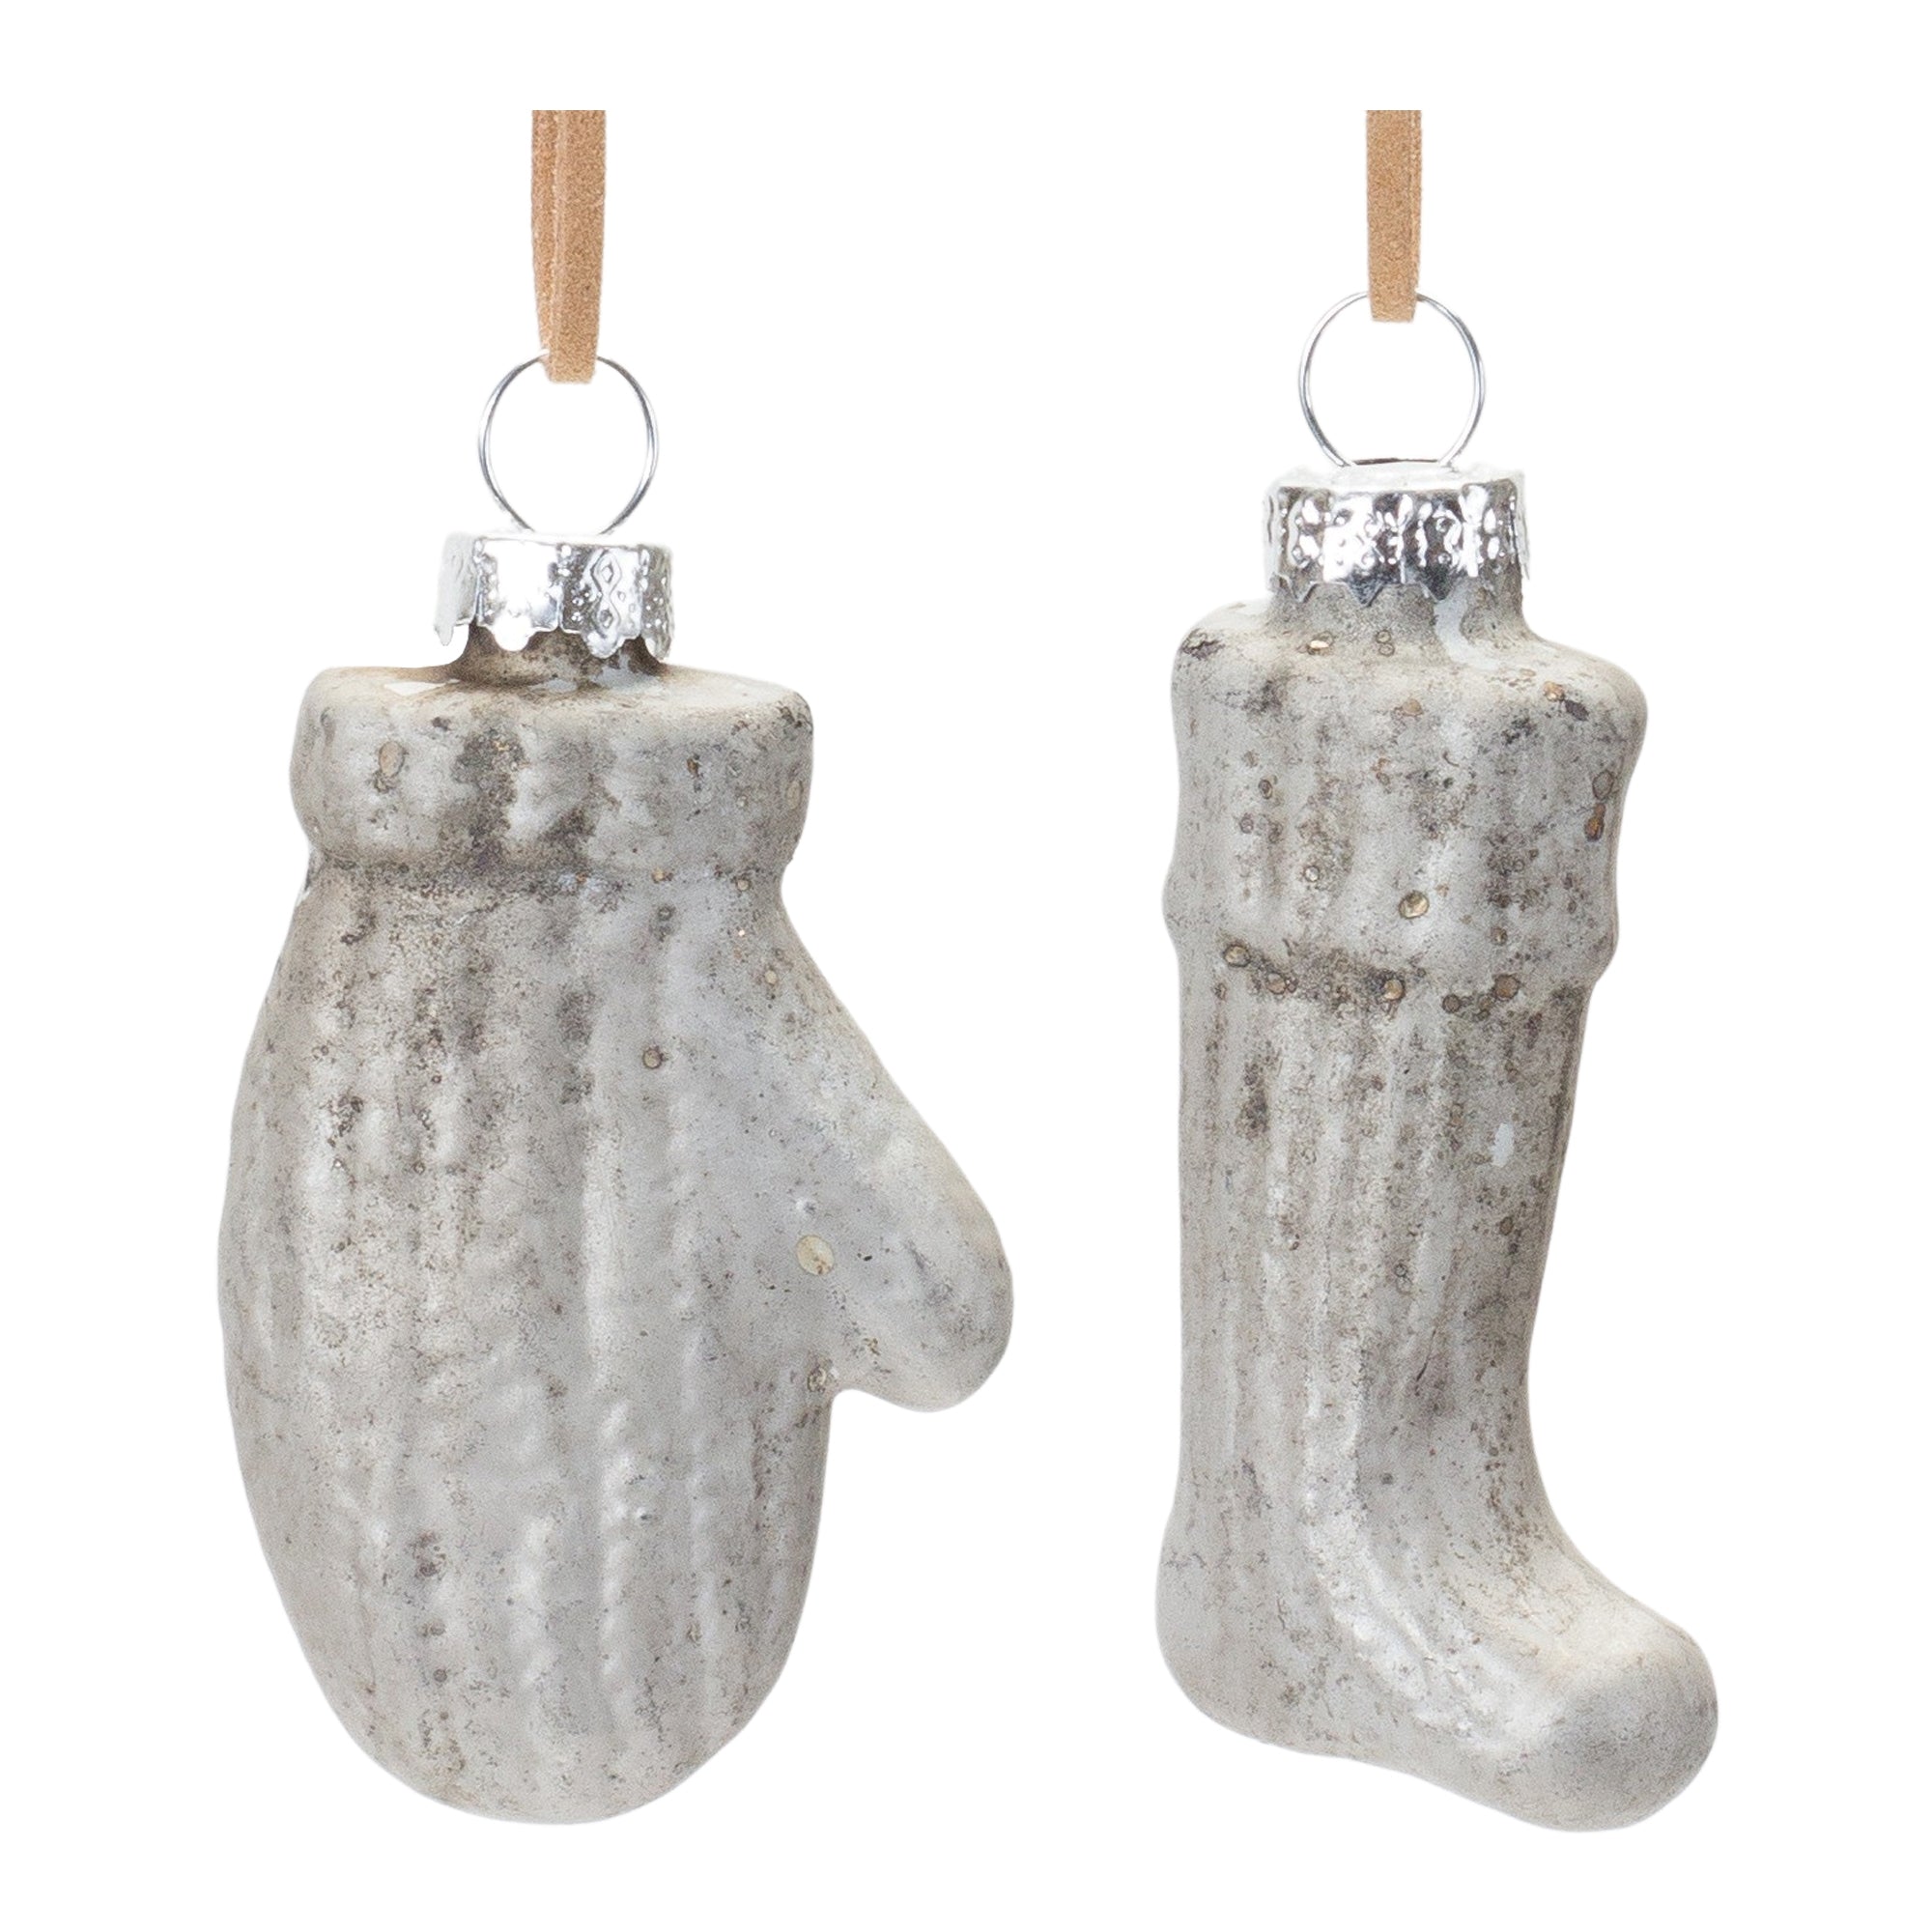 Glass Mitten and Stocking Ornament (Set of 12)